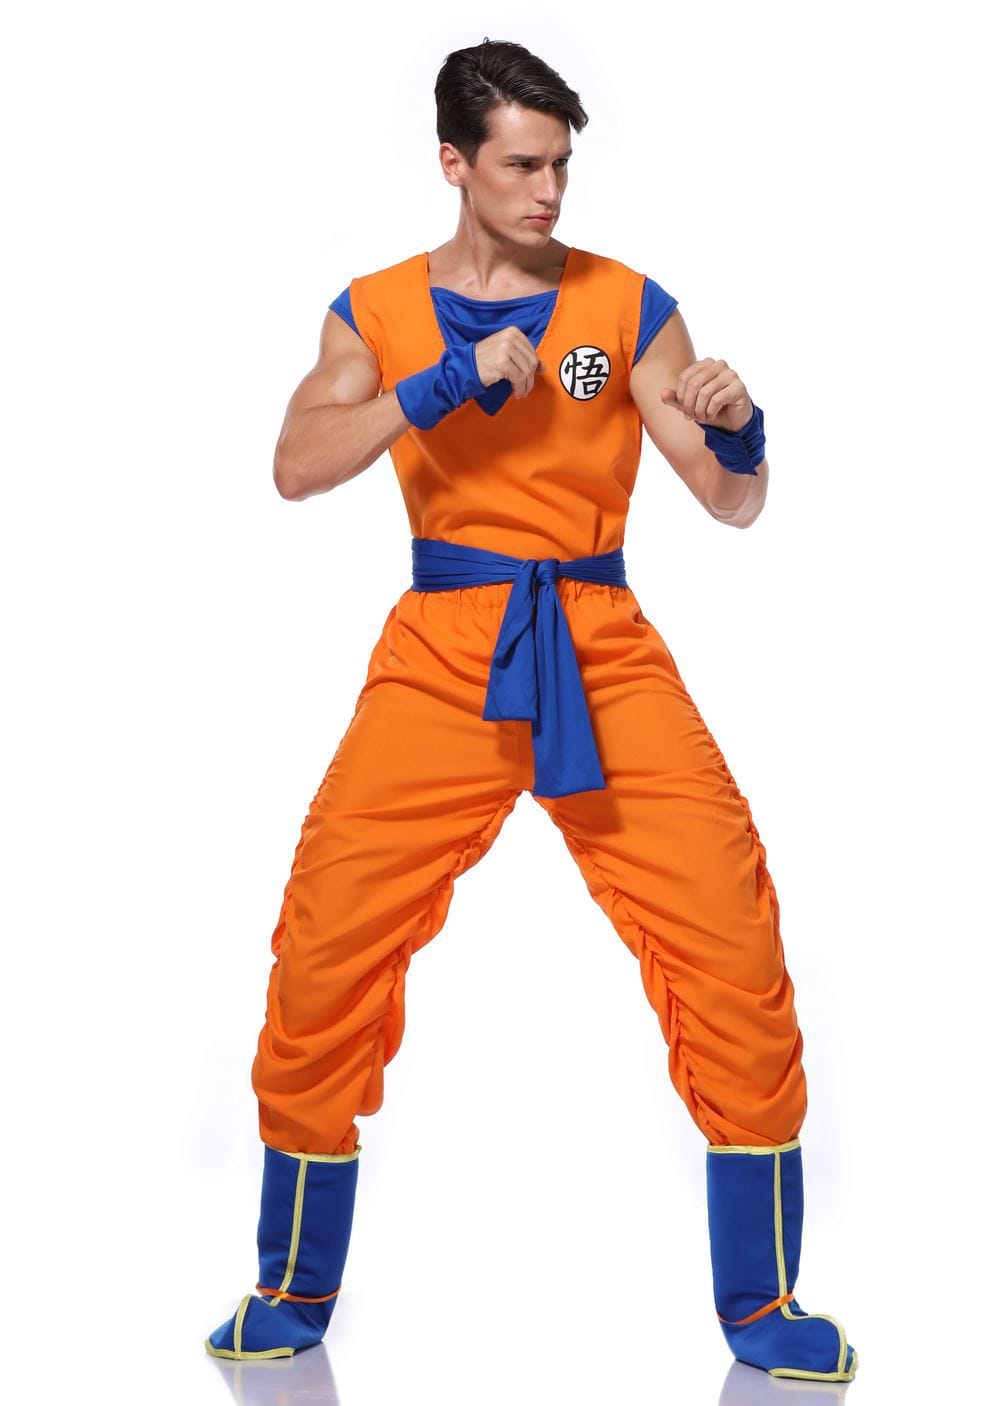 Goku Costume - Dragon Ball. Express delivery